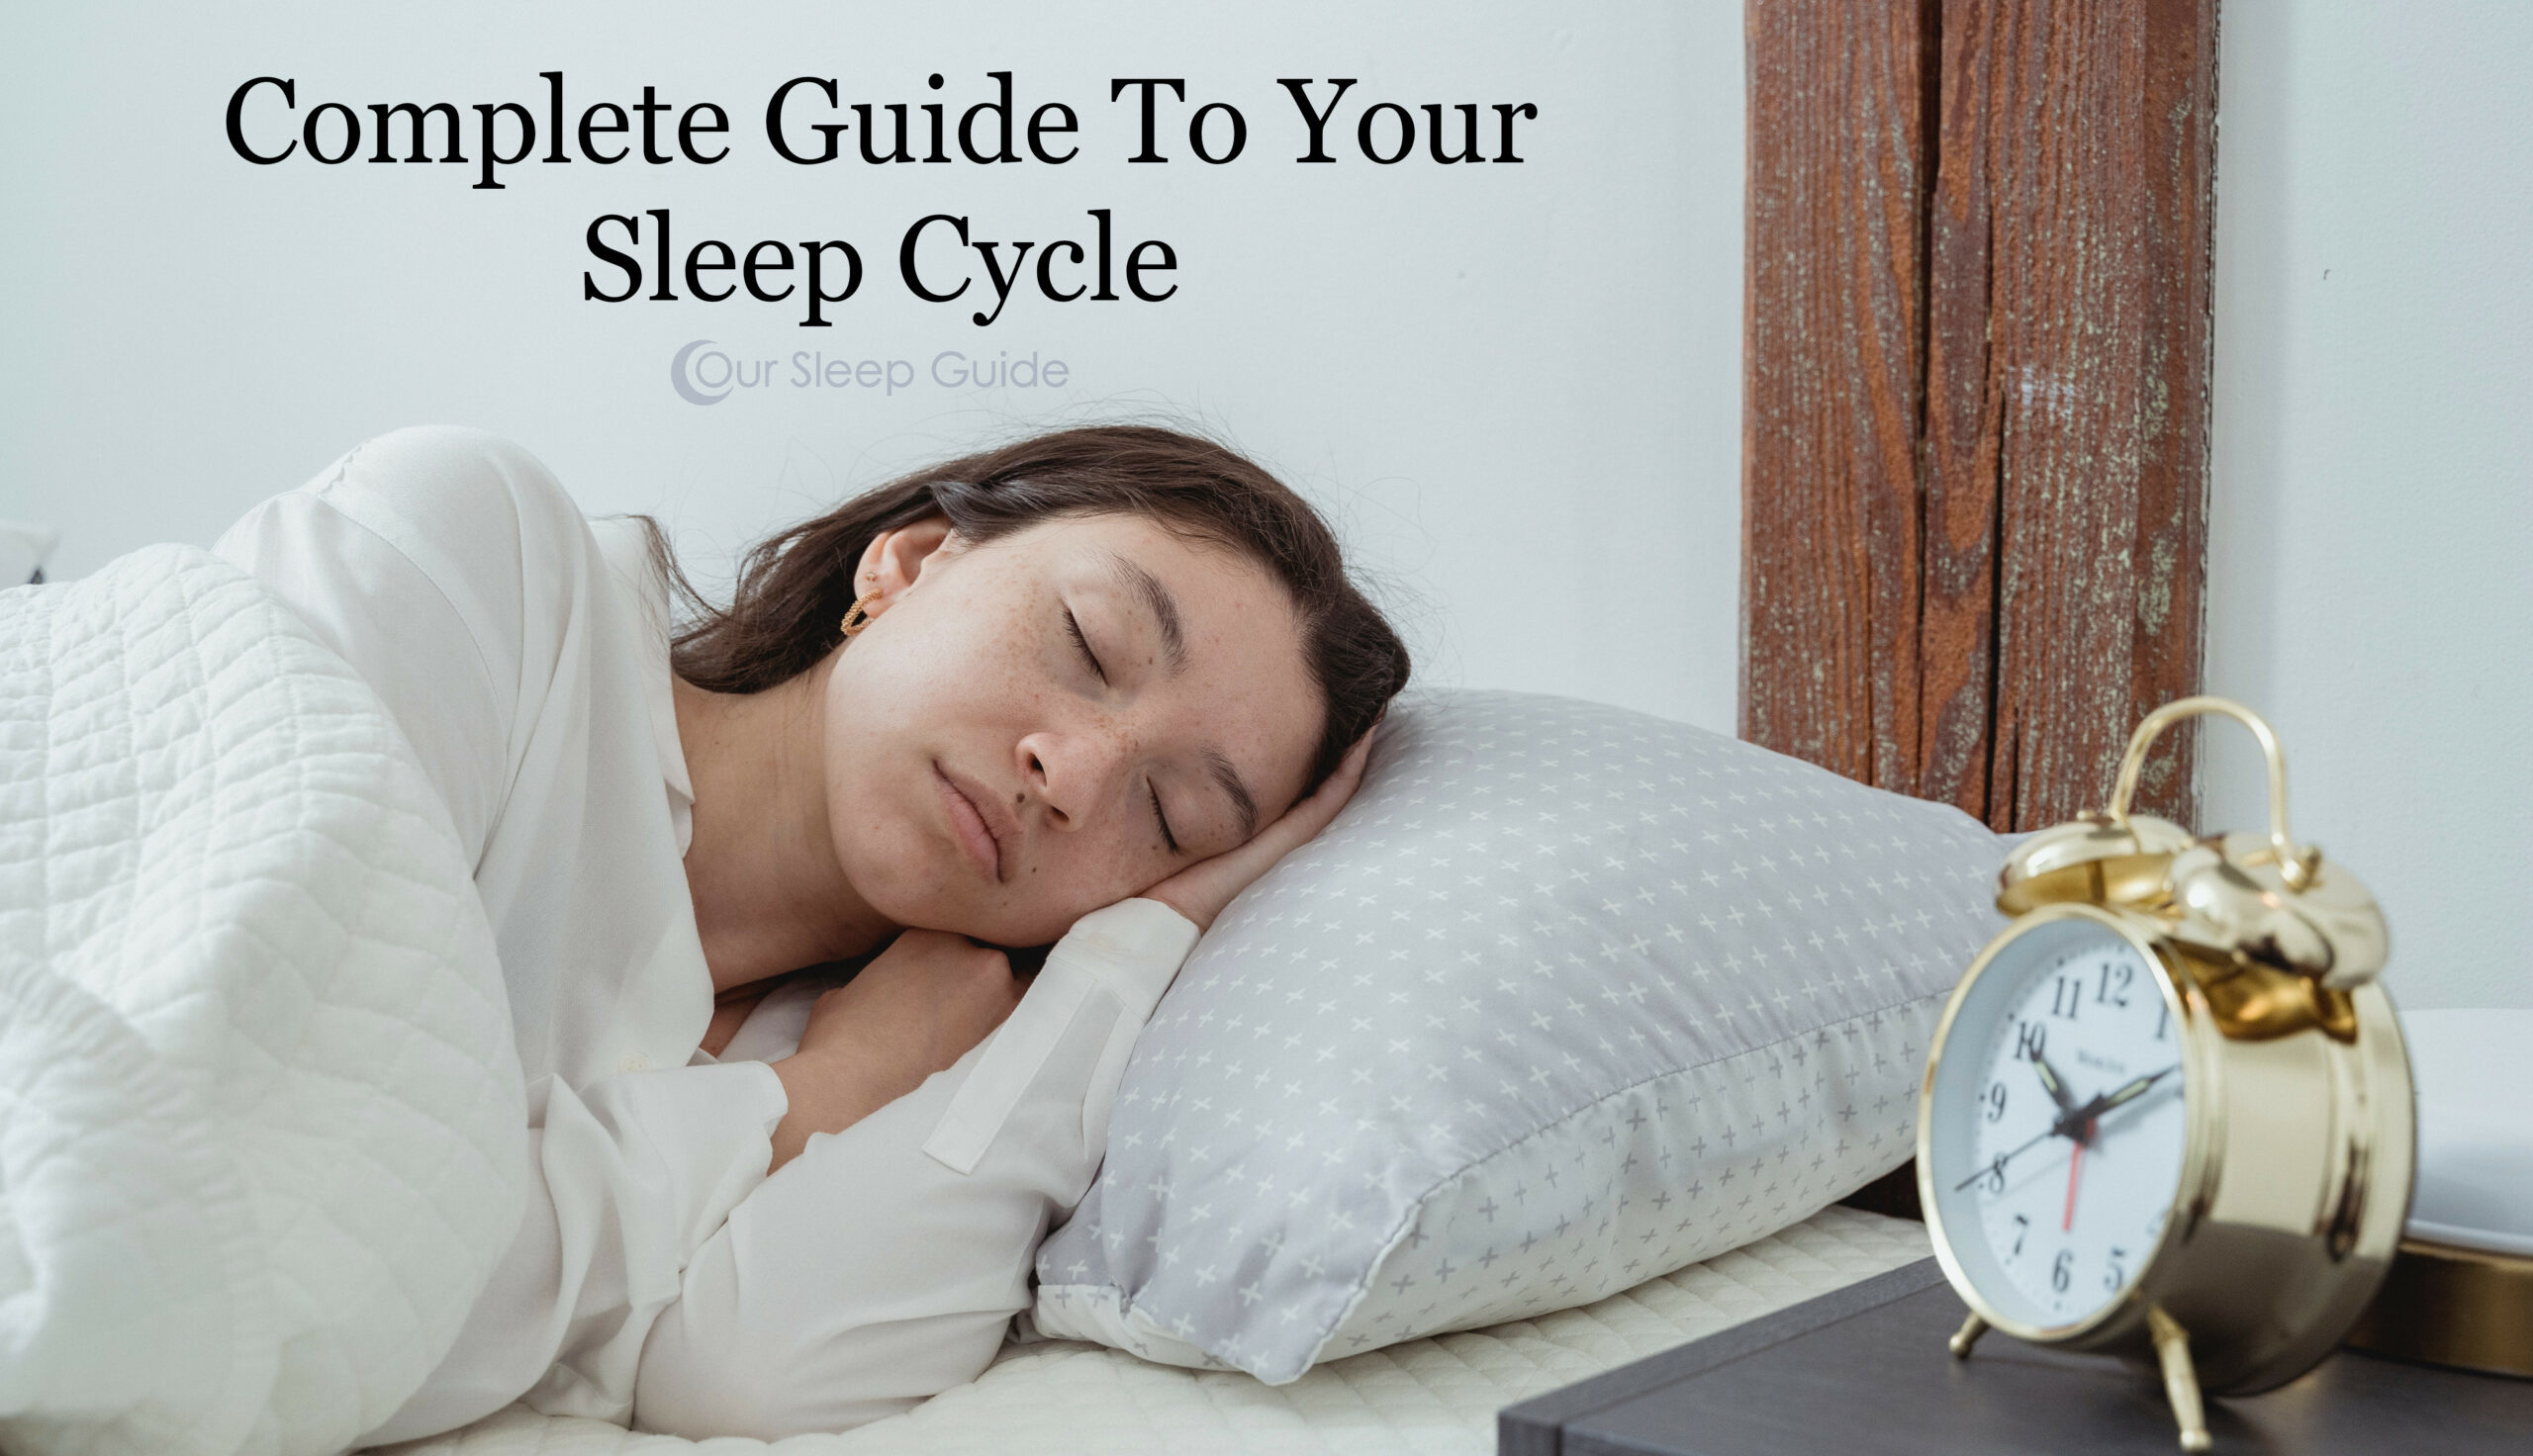 our complete guide to your sleep cycle